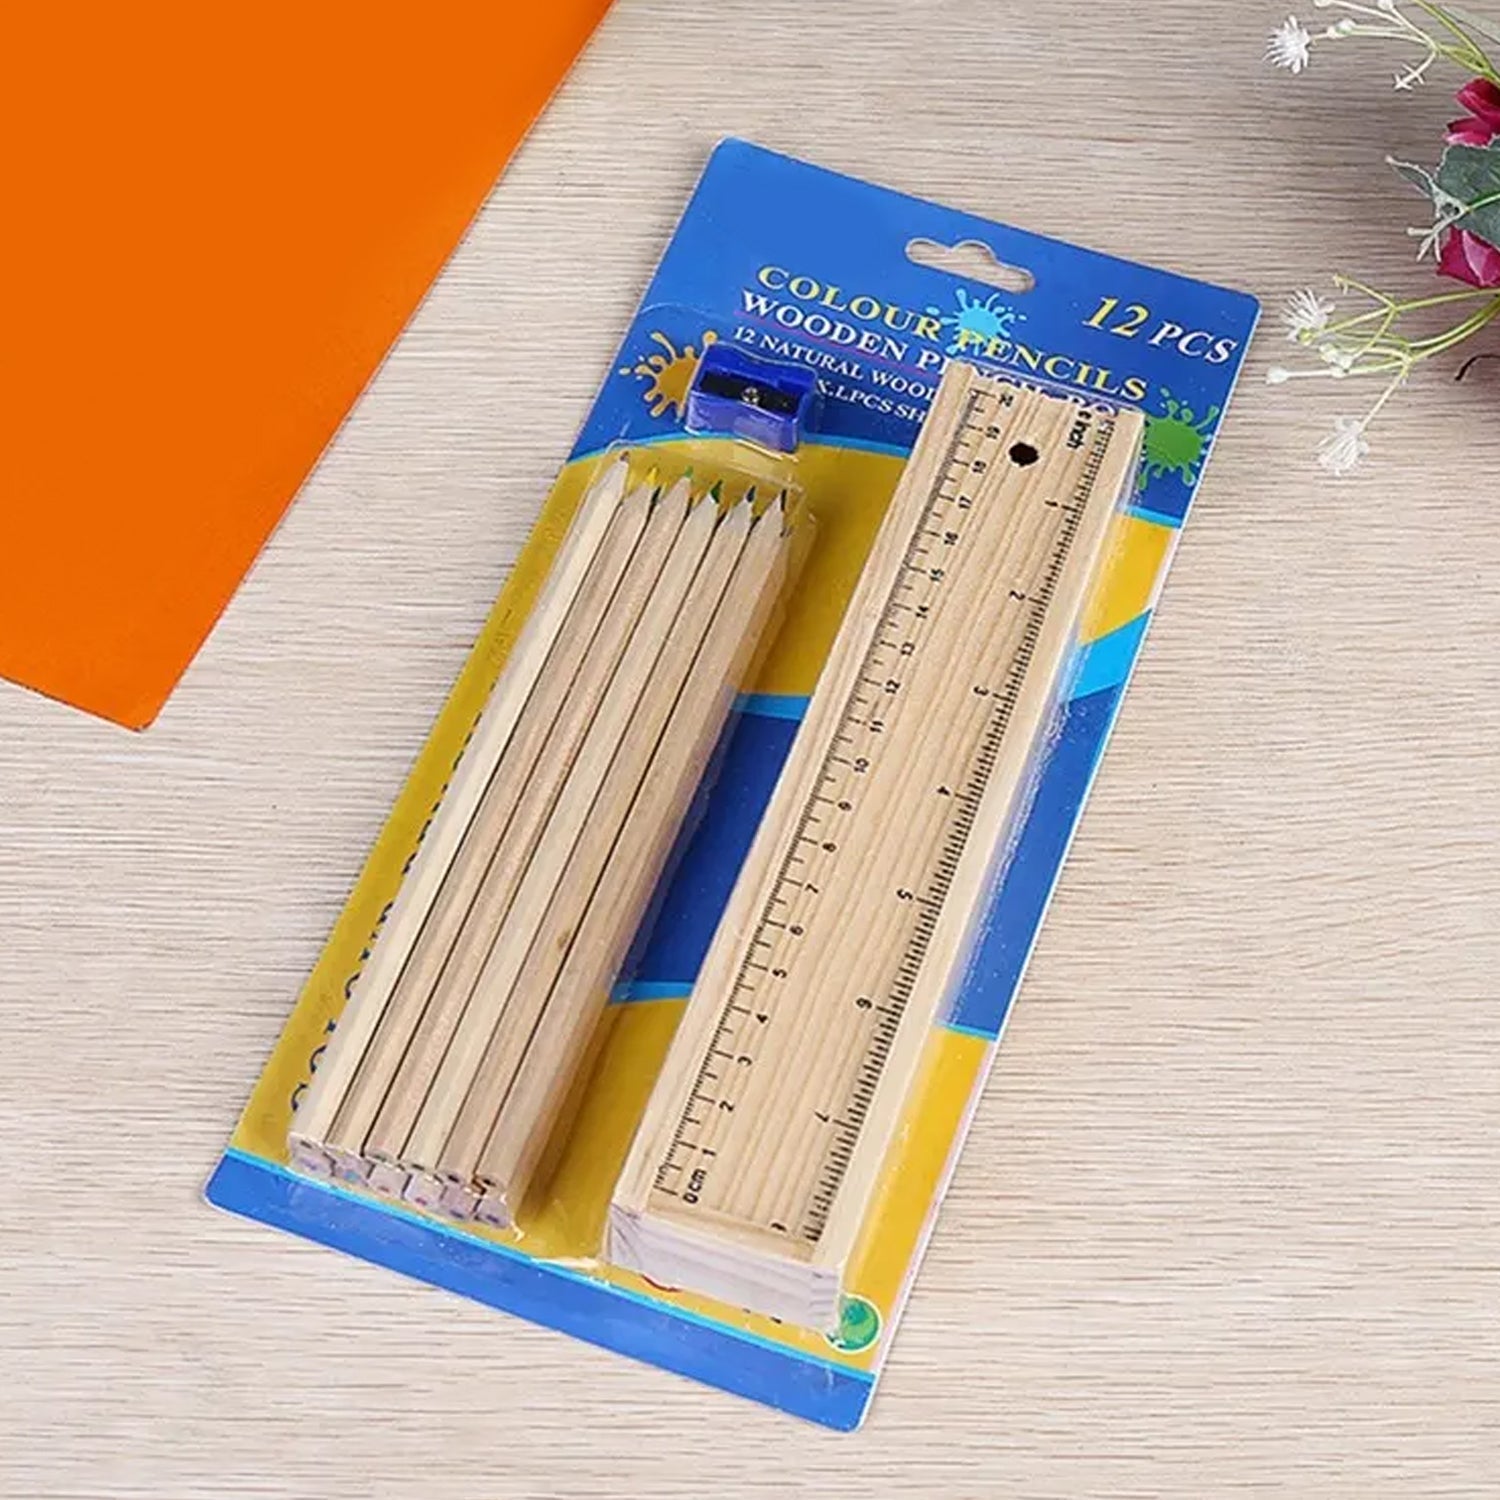 4726 Colorful Wooden Pencil Set with Pencil box, Ruler, Sharpener For for Kids, Artist, Architect